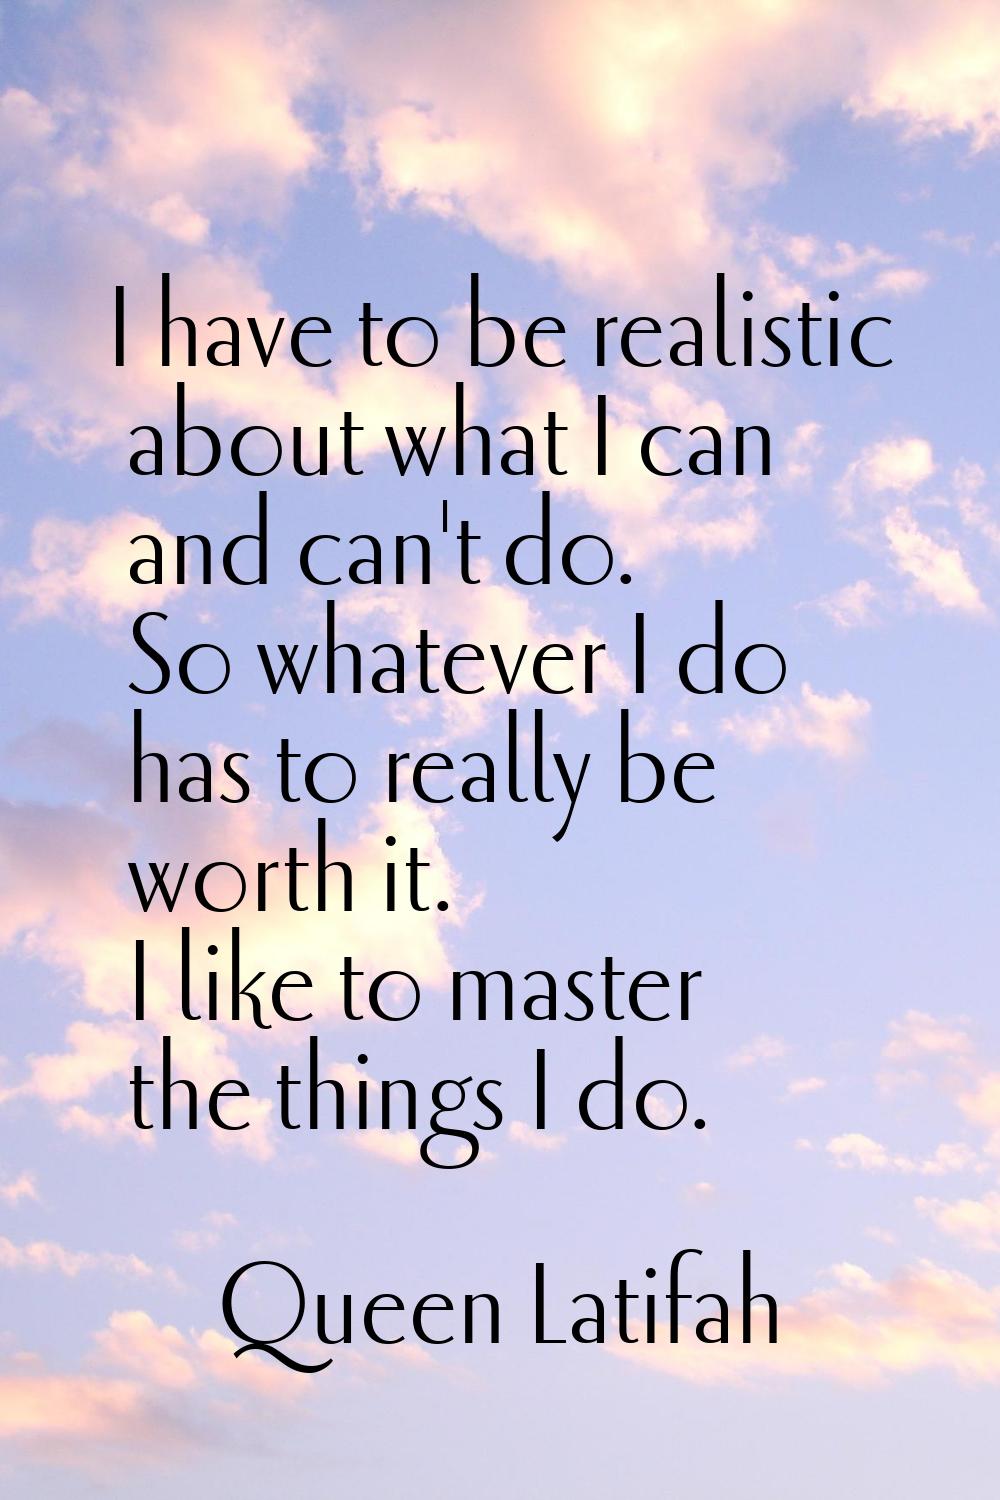 I have to be realistic about what I can and can't do. So whatever I do has to really be worth it. I